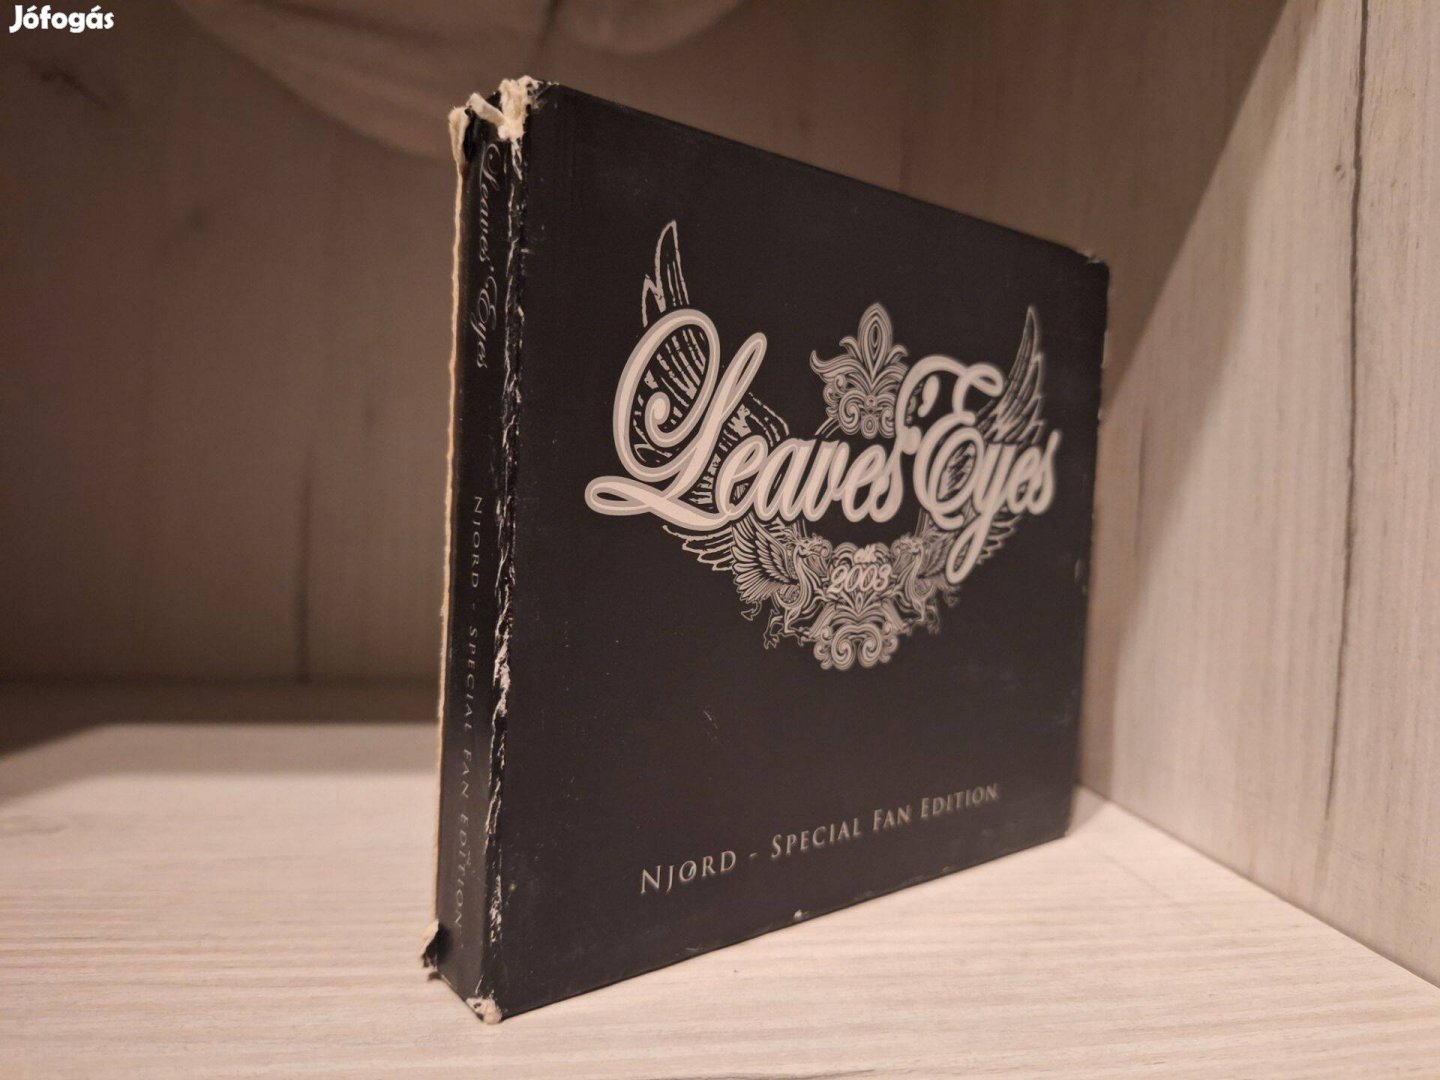 Leaves' Eyes - Njord - Special Fan Edition - 2 x CD - Limited Edition